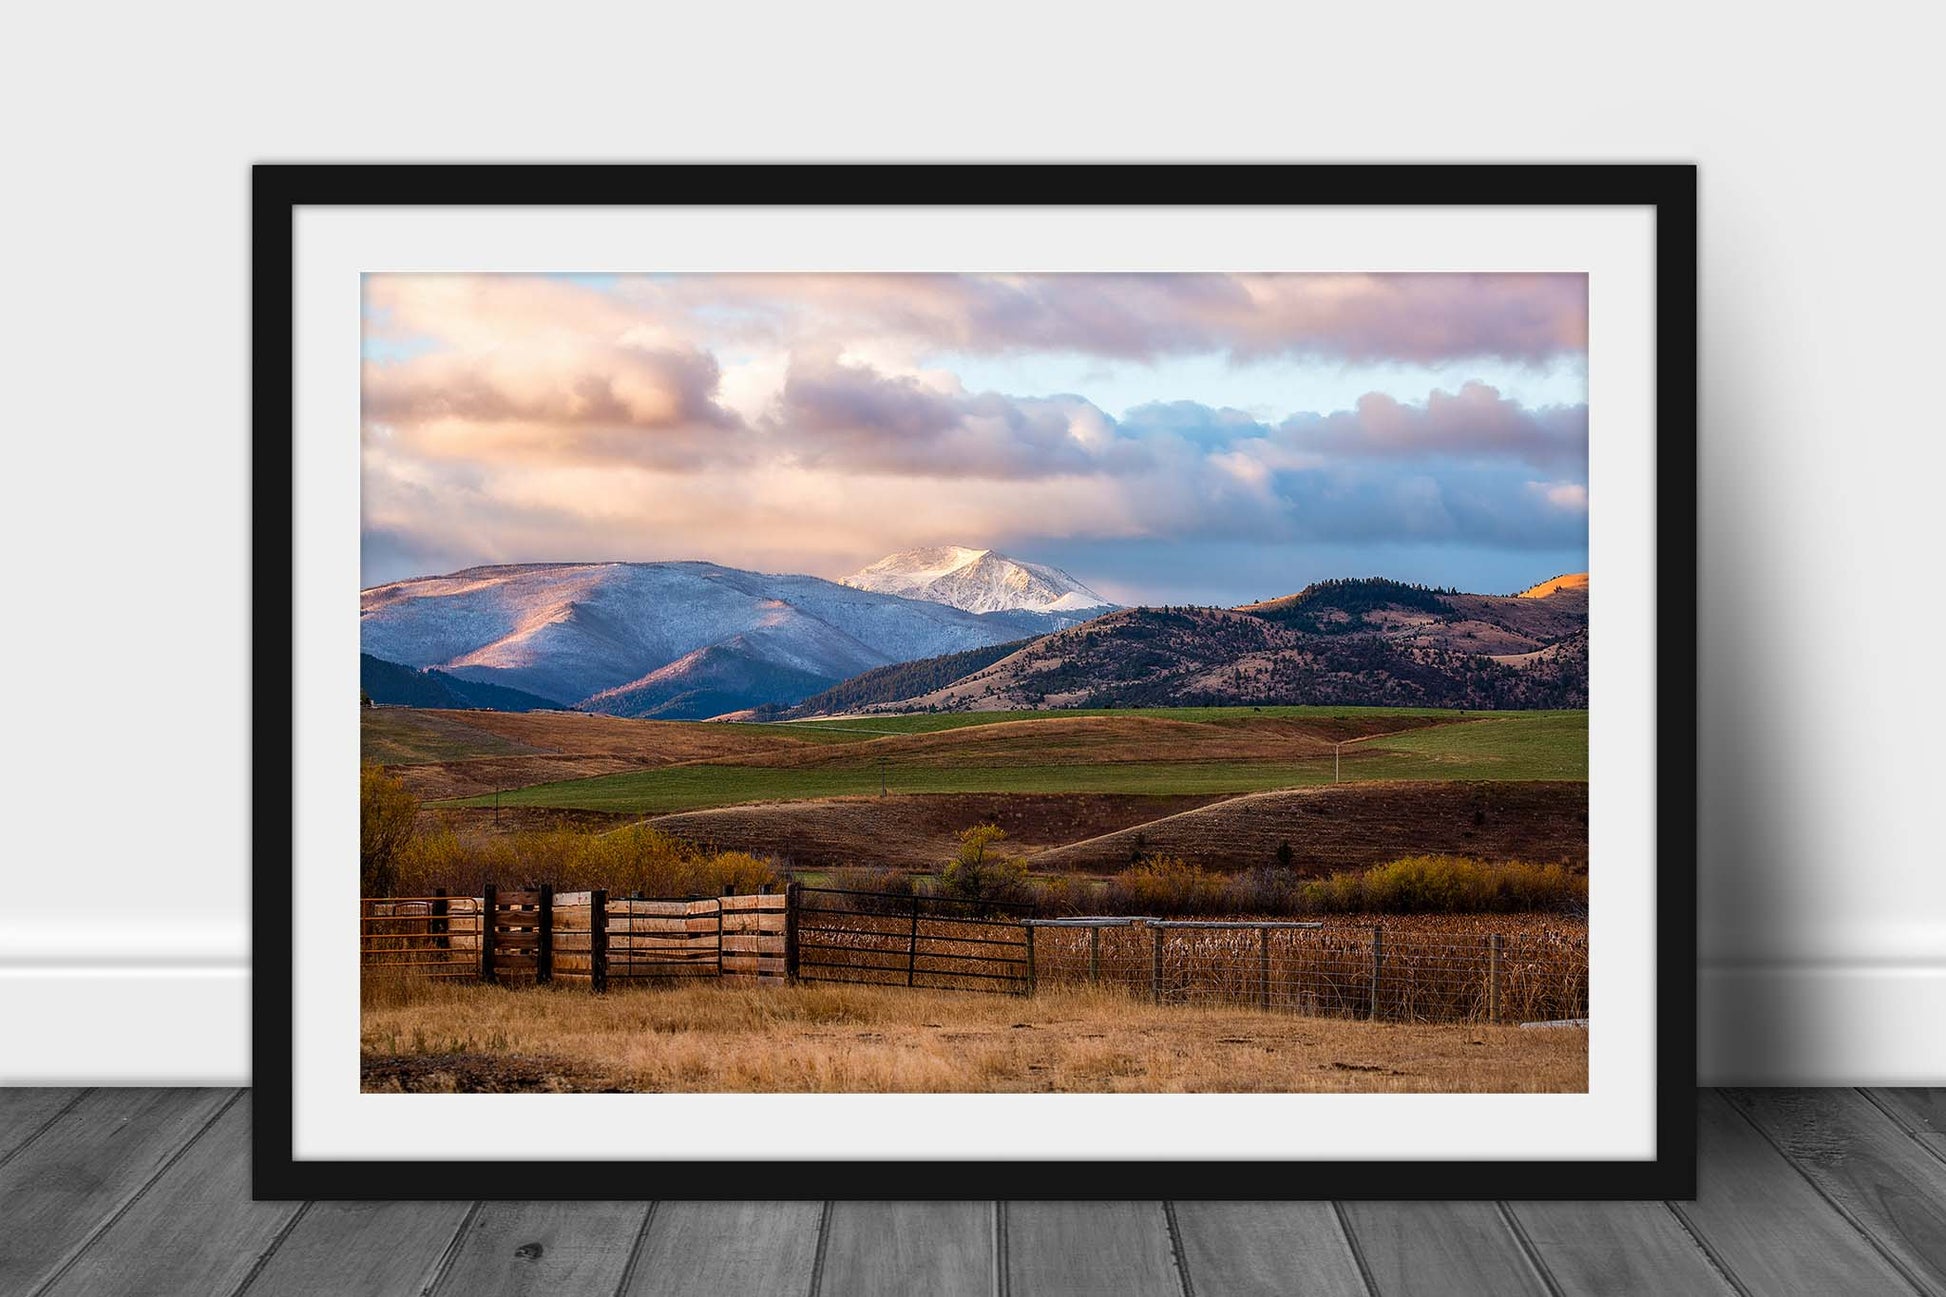 Framed Rocky Mountain landscape print with optional mat of a snowy peak overlooking a valley at sunrise on an autumn morning in Montana by Sean Ramsey of Southern Plains Photography.